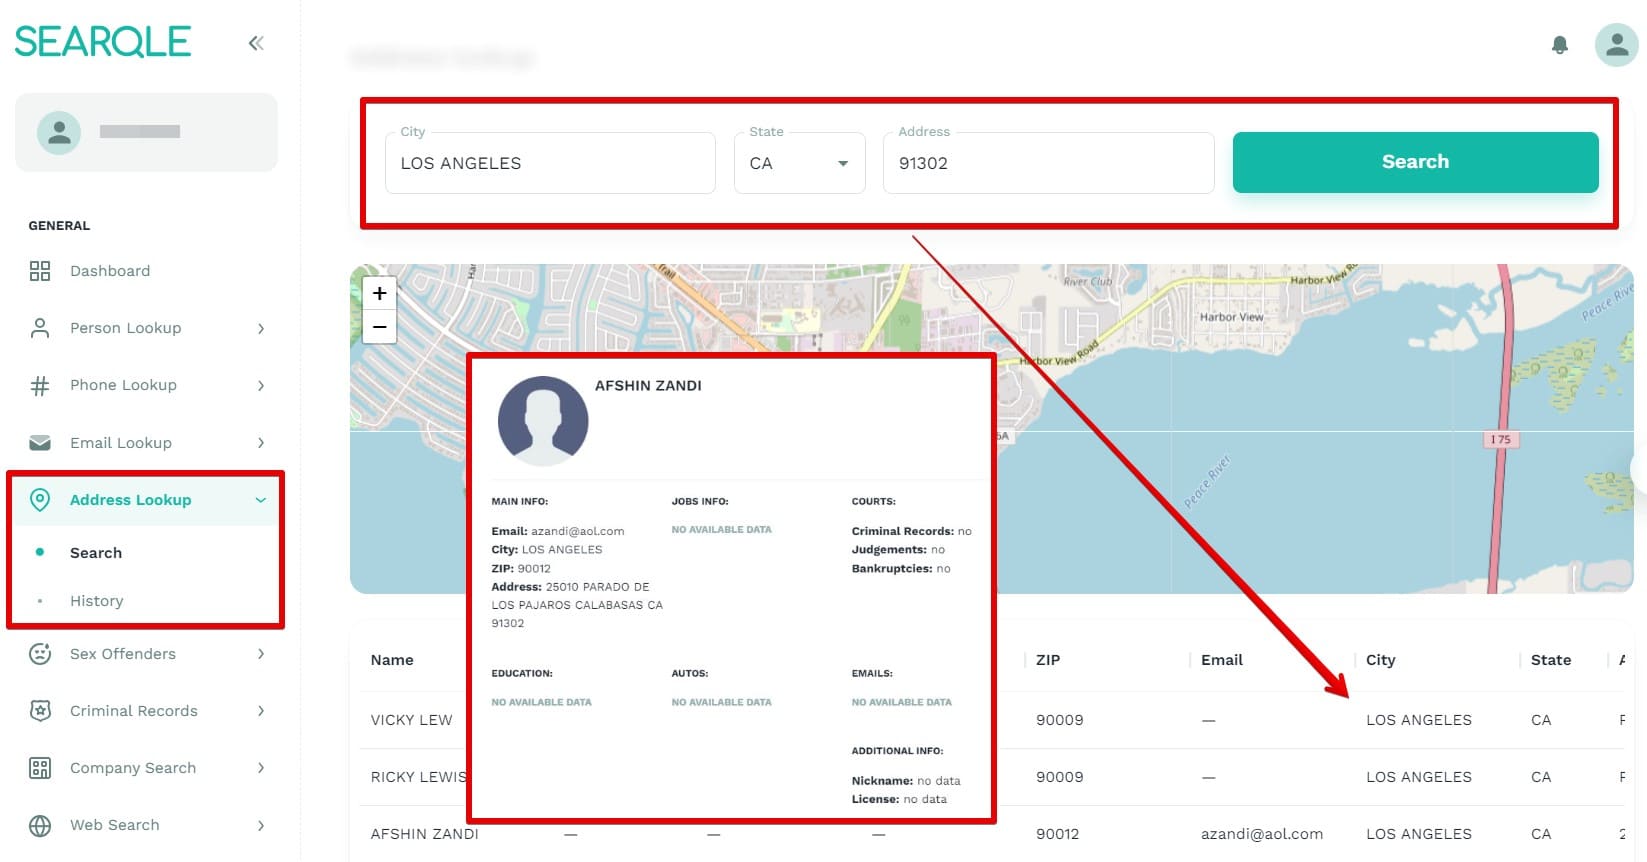 Image showing how to find a person by address on the Searqle website and what data will be visible in the search